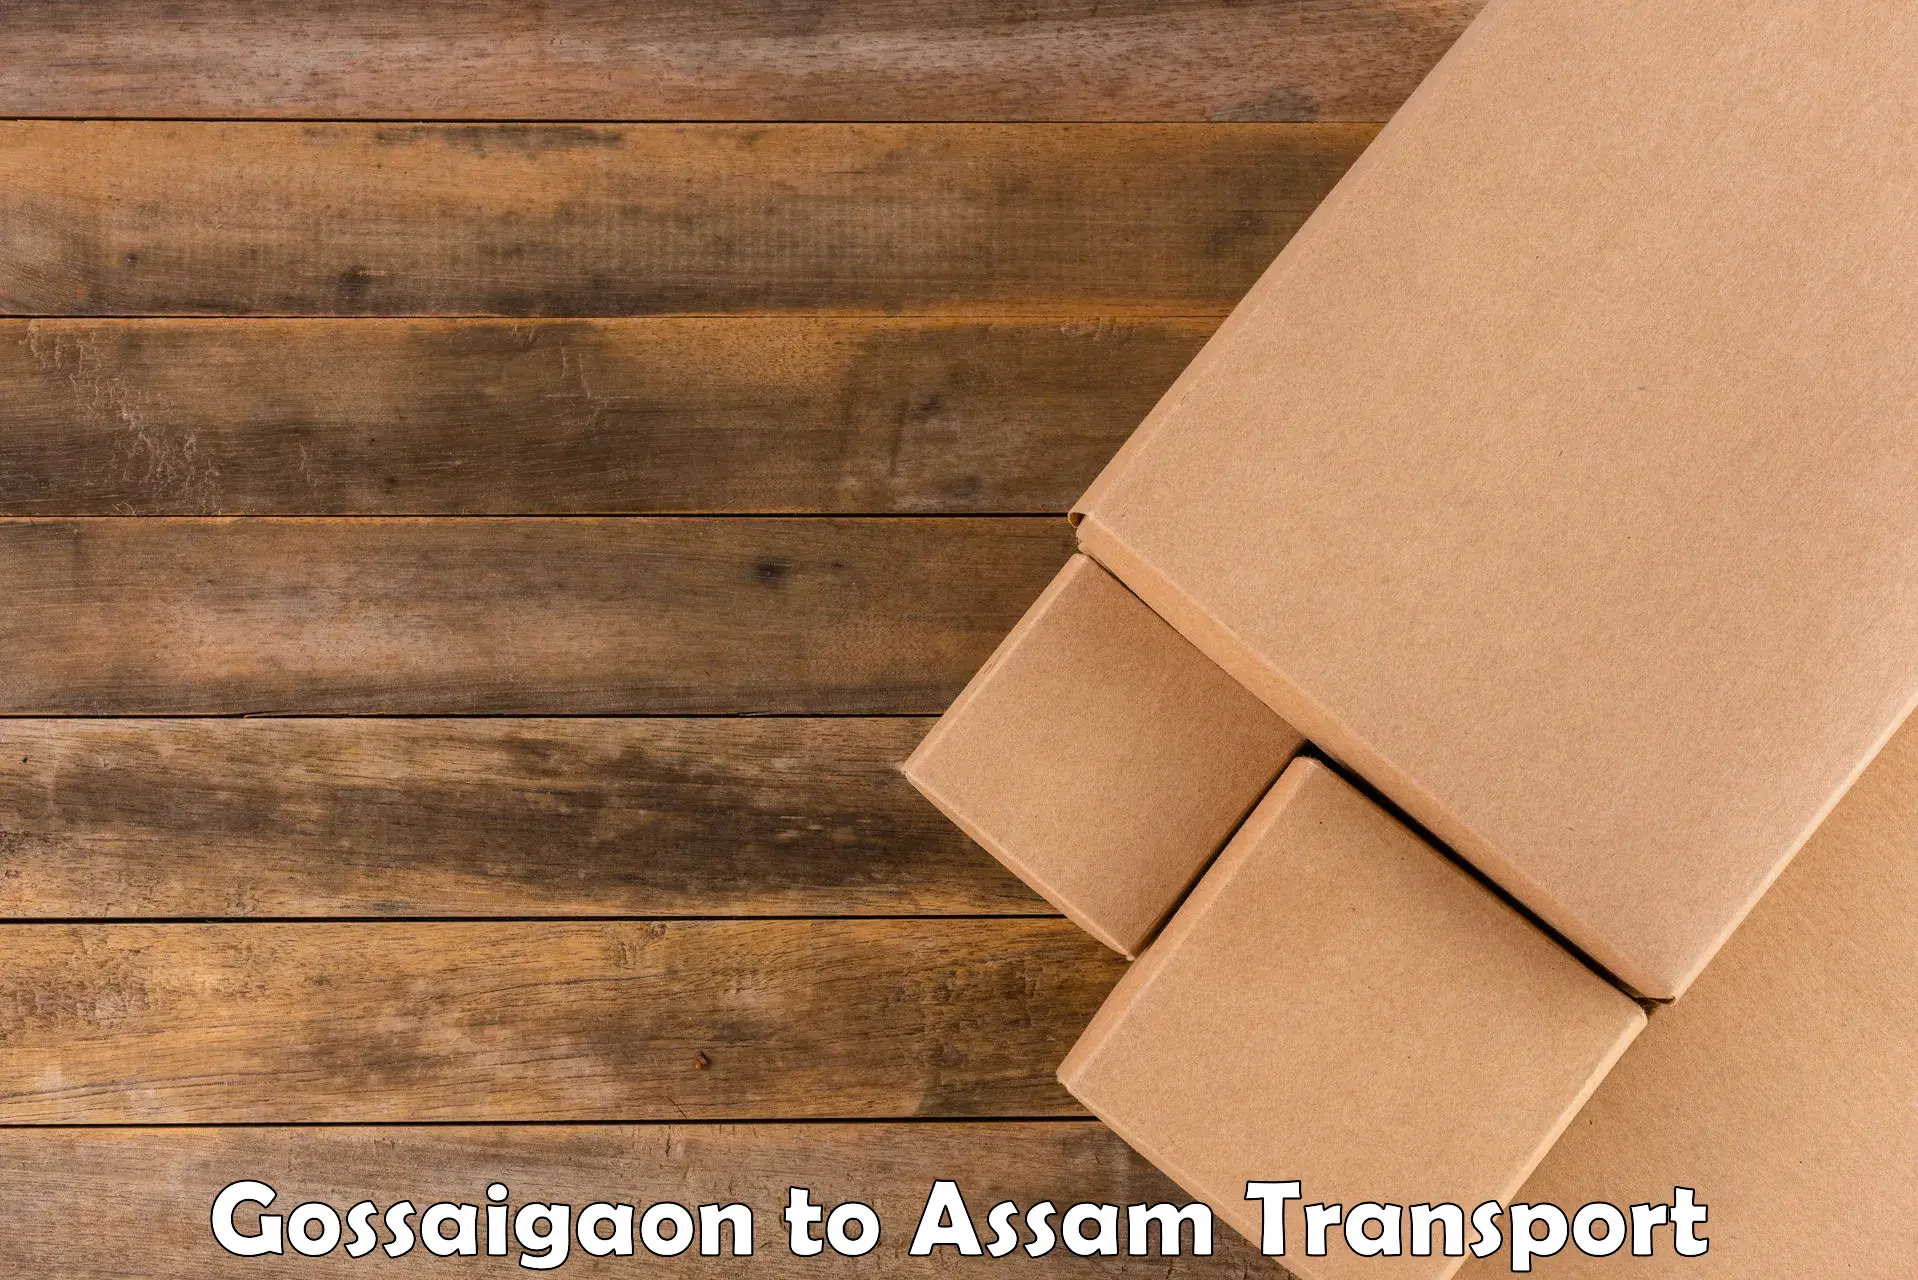 Transport services Gossaigaon to Kamrup